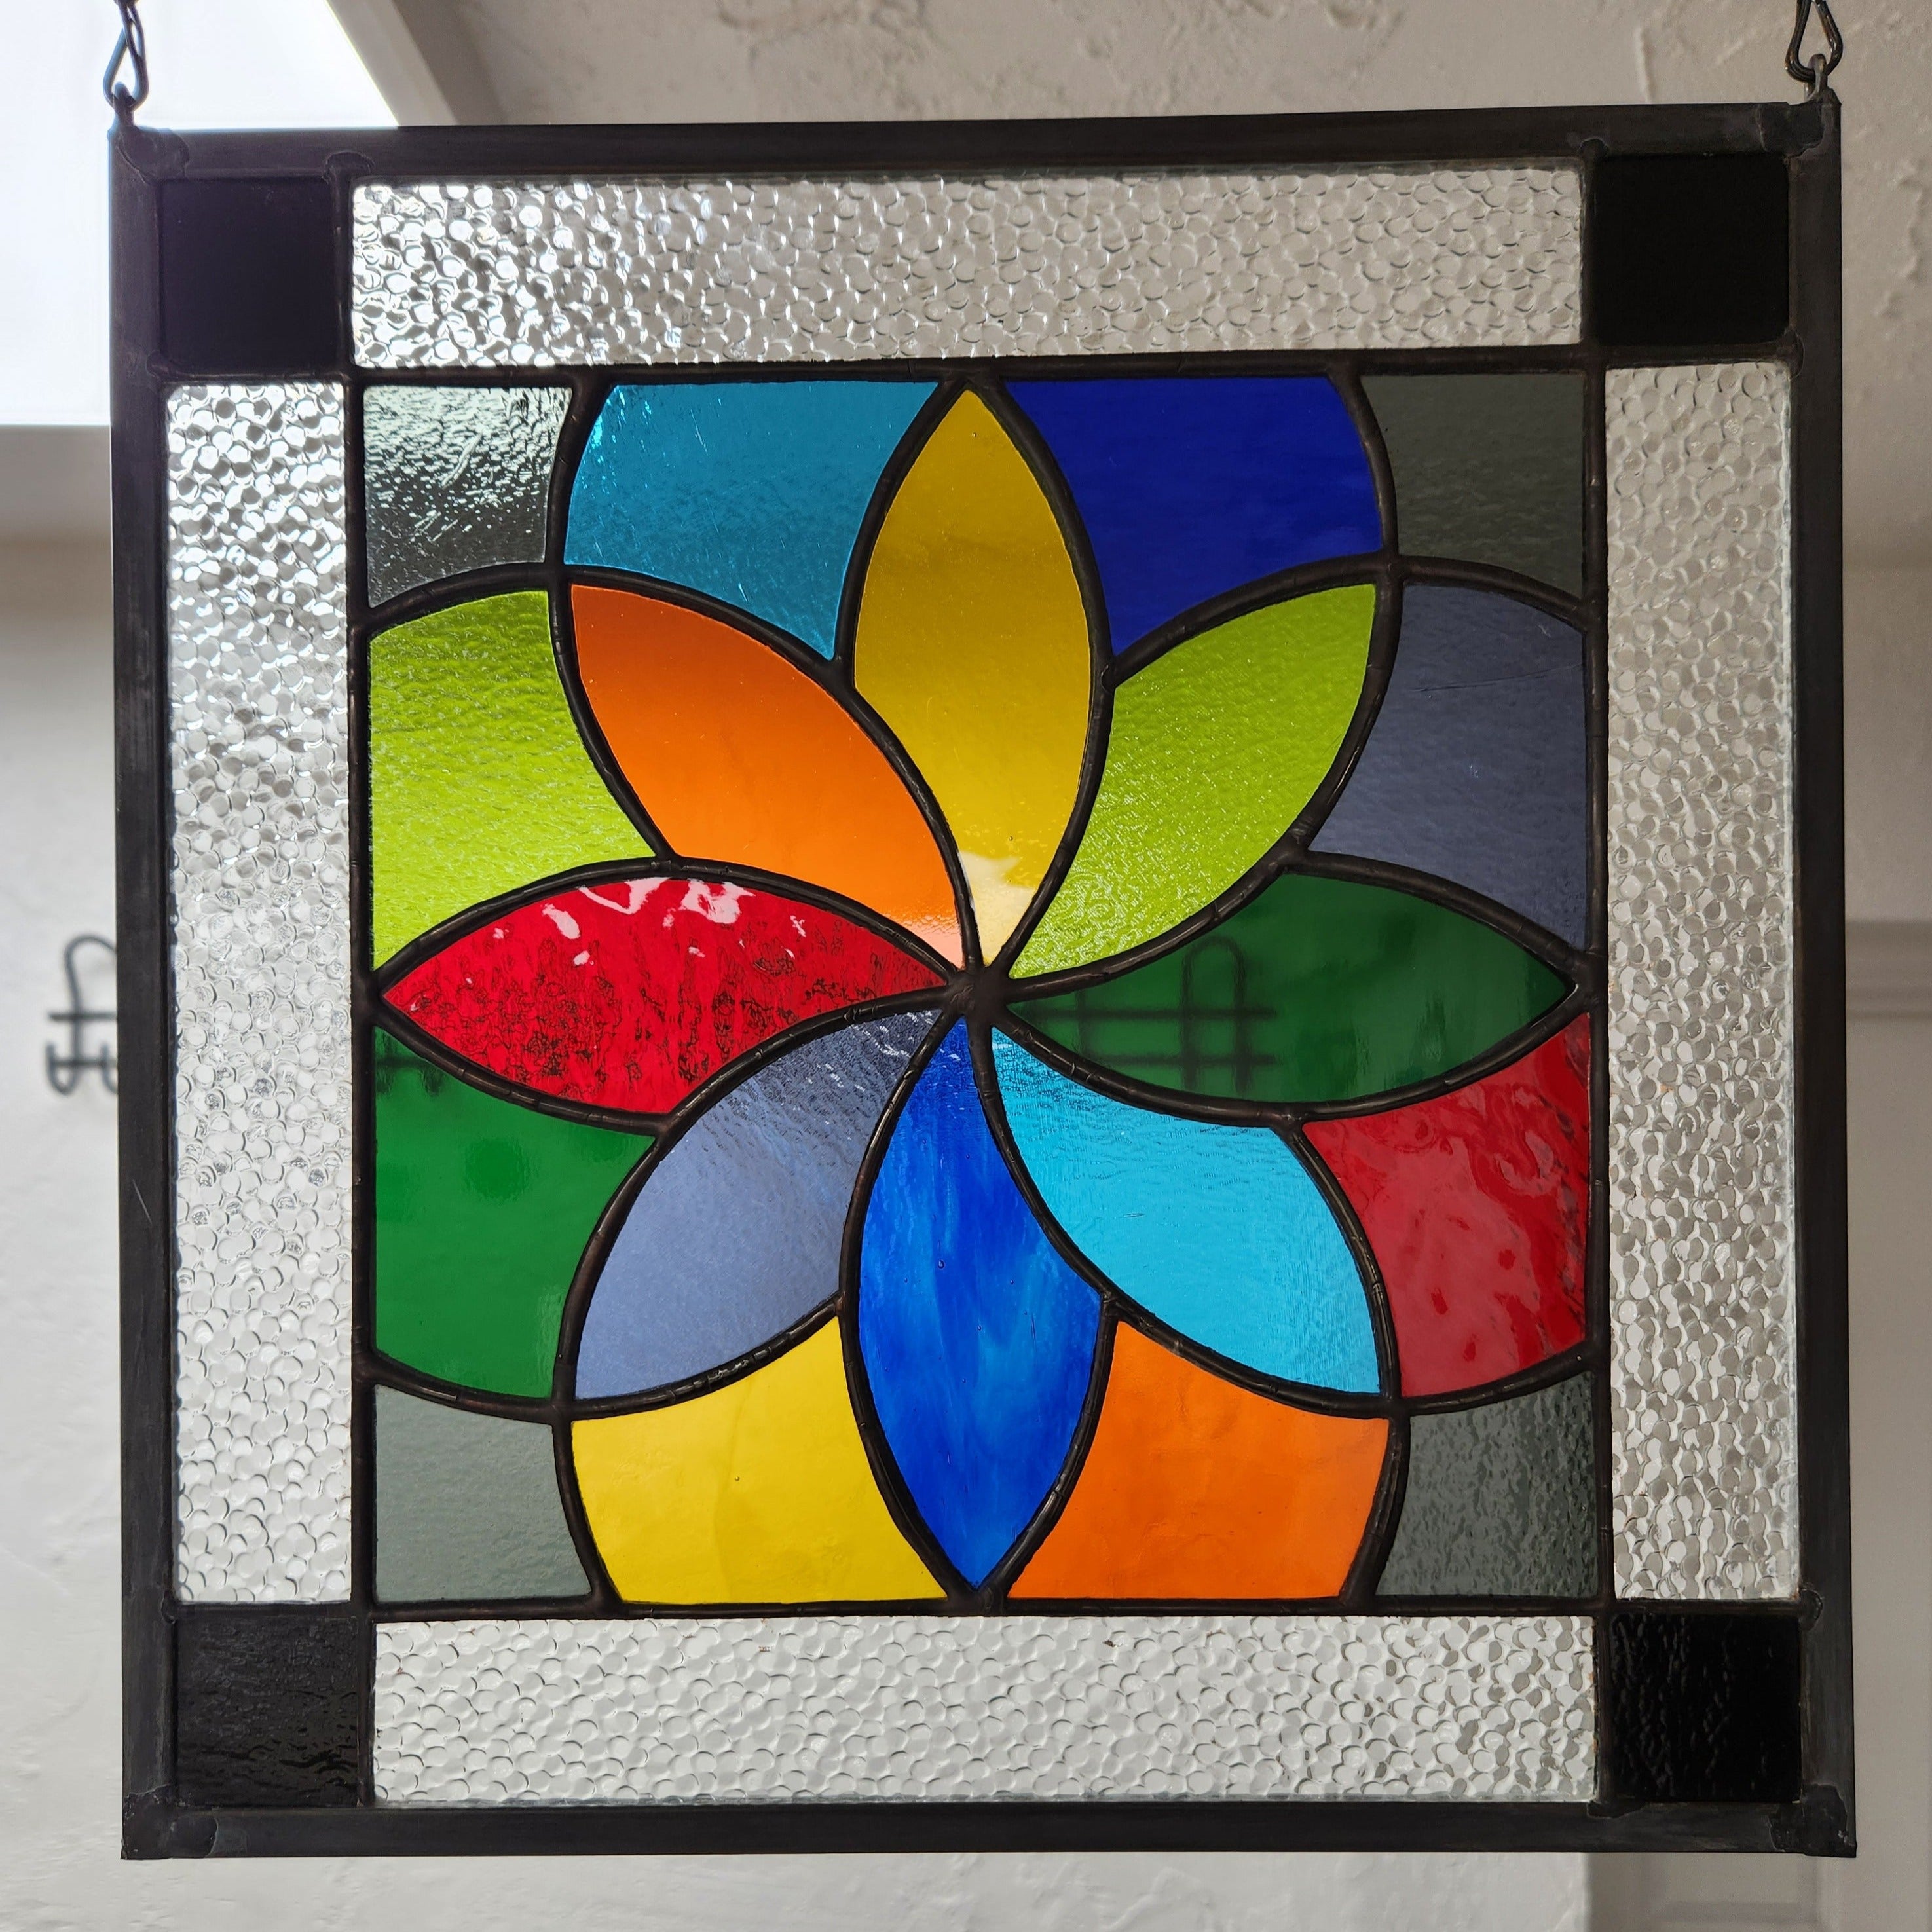 Shop Stained Glass Tools & Accessories